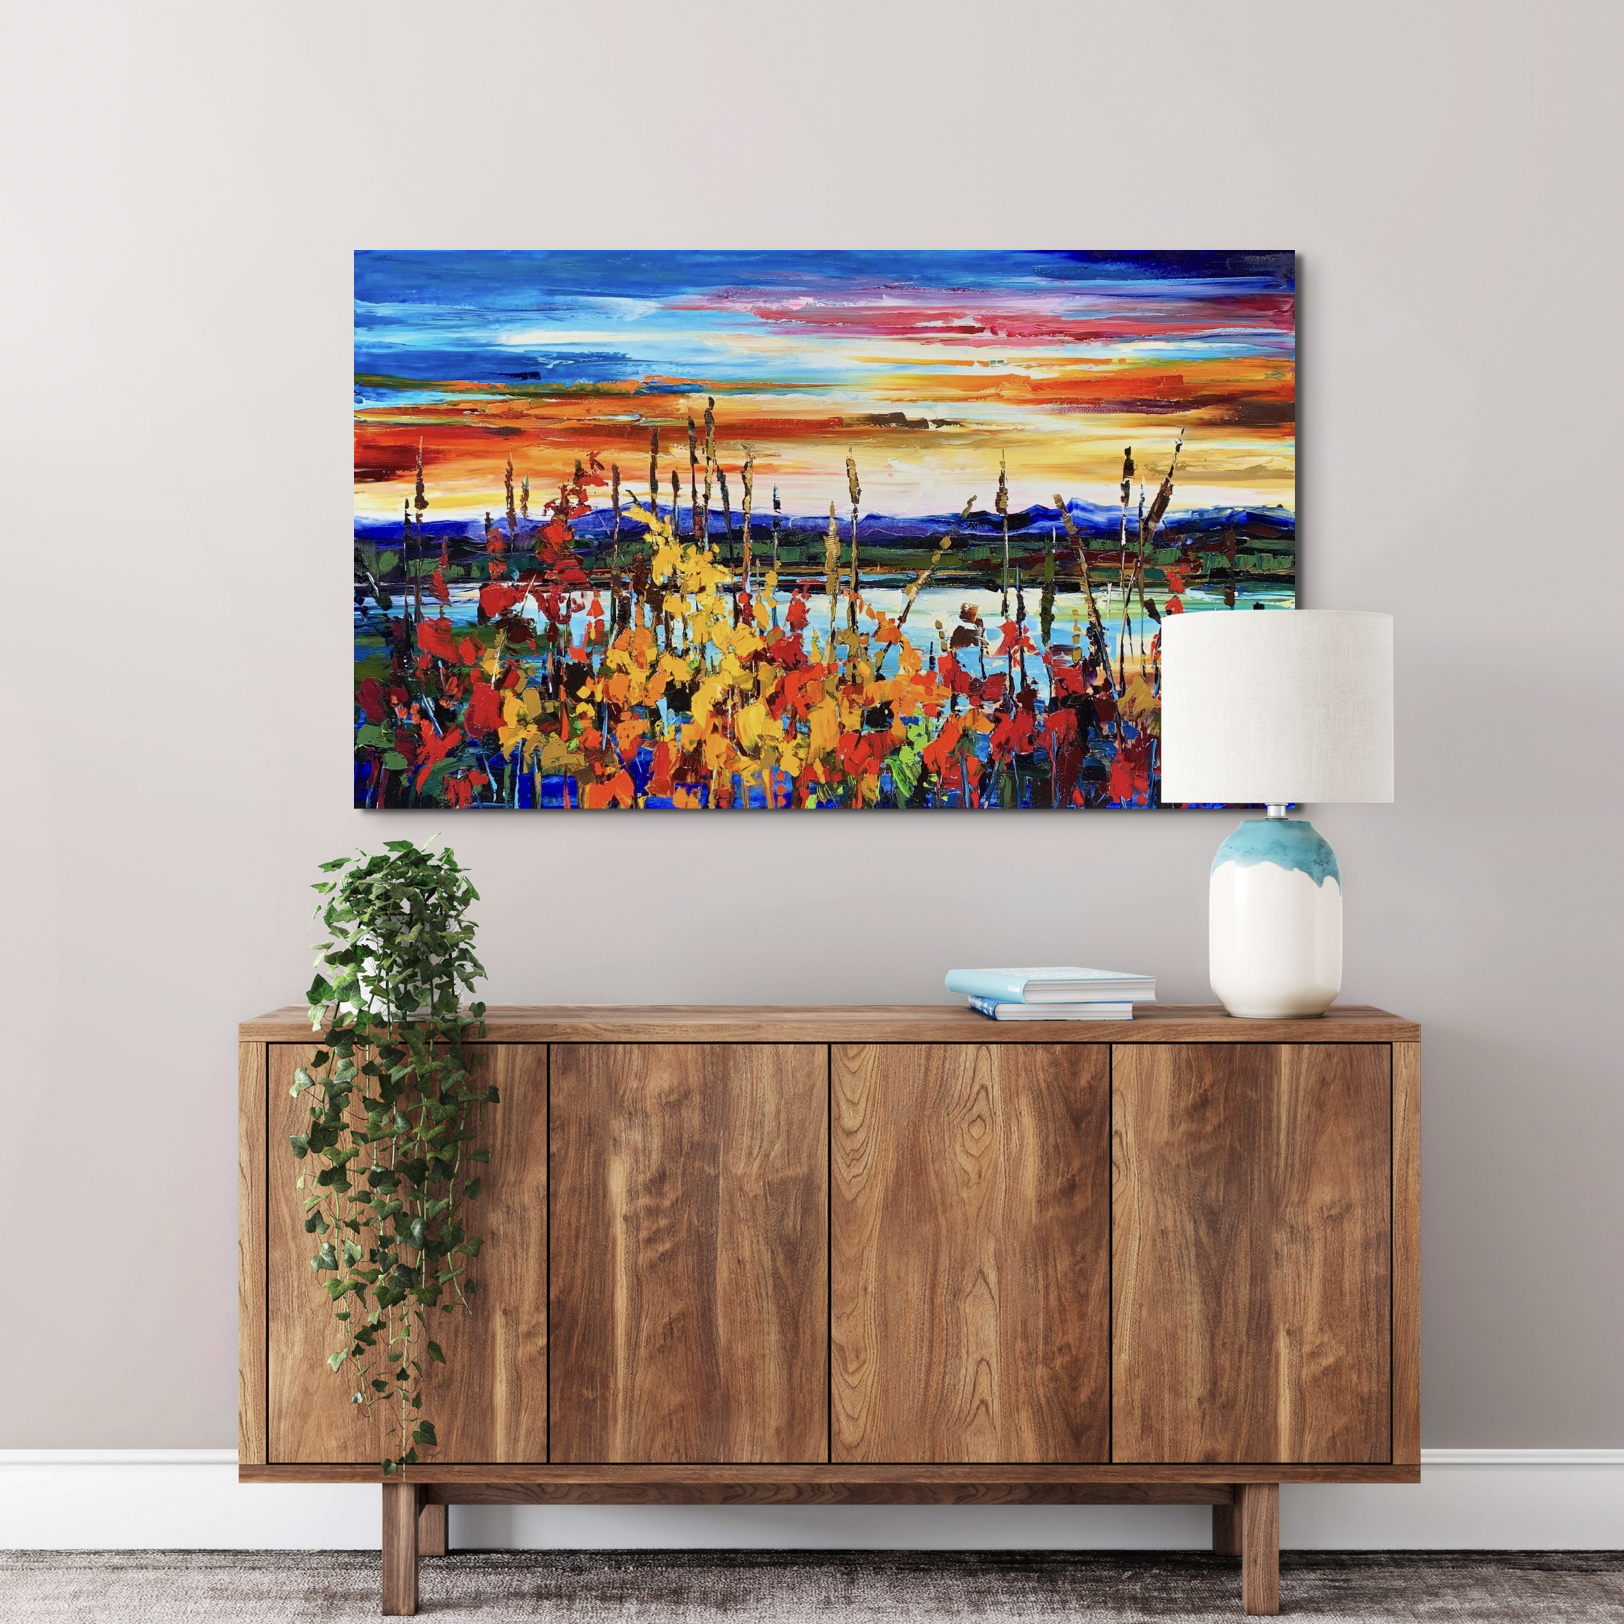 Kimberly Kiel oil painting of a vibrant sunset above a lake with colorful wildflowers in the foreground above a wooden mid-century modern cabinet.